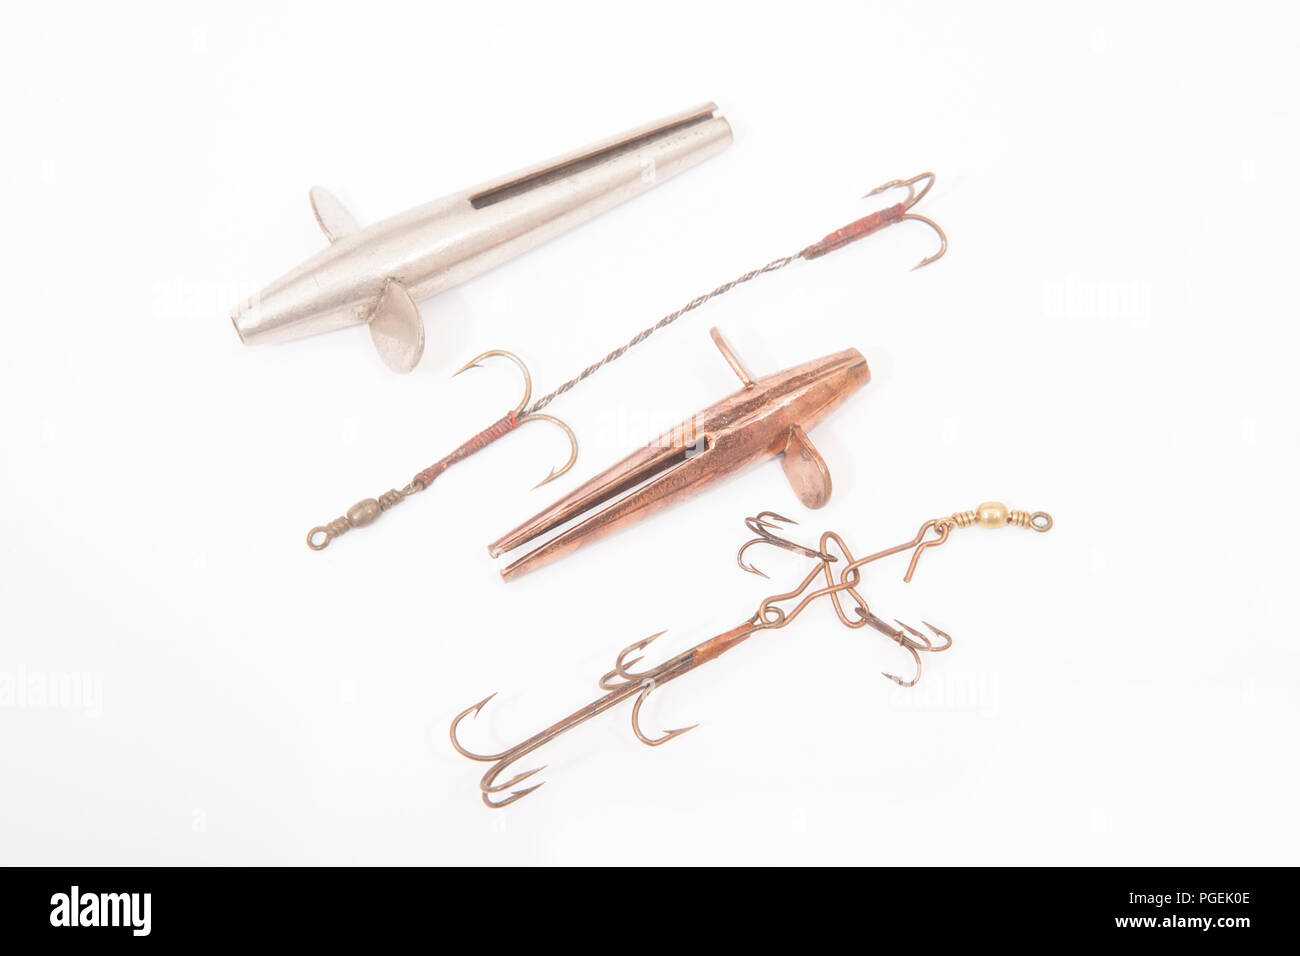 https://c8.alamy.com/comp/PGEK0E/two-old-revolving-devon-minnow-lures-with-multiple-hooks-that-have-been-removed-from-the-lures-from-a-collection-of-vintage-fishing-tackle-north-d-PGEK0E.jpg